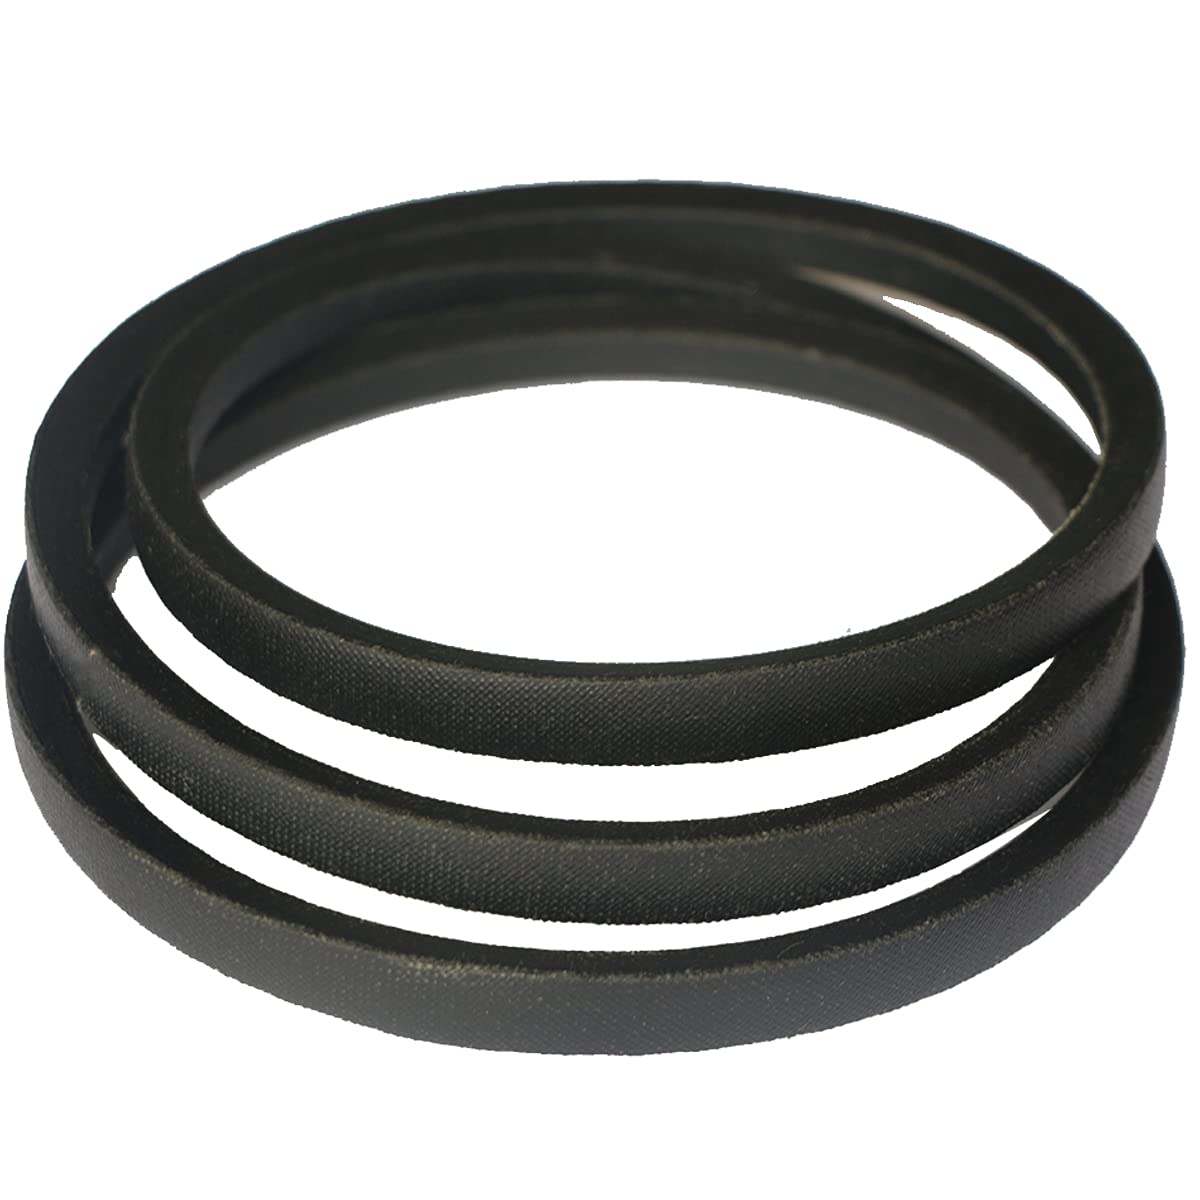 579932MA 1733324SM 3/8" x 33" Drive Belt for Murray Craftsman Snow throwers 579932 579932MA